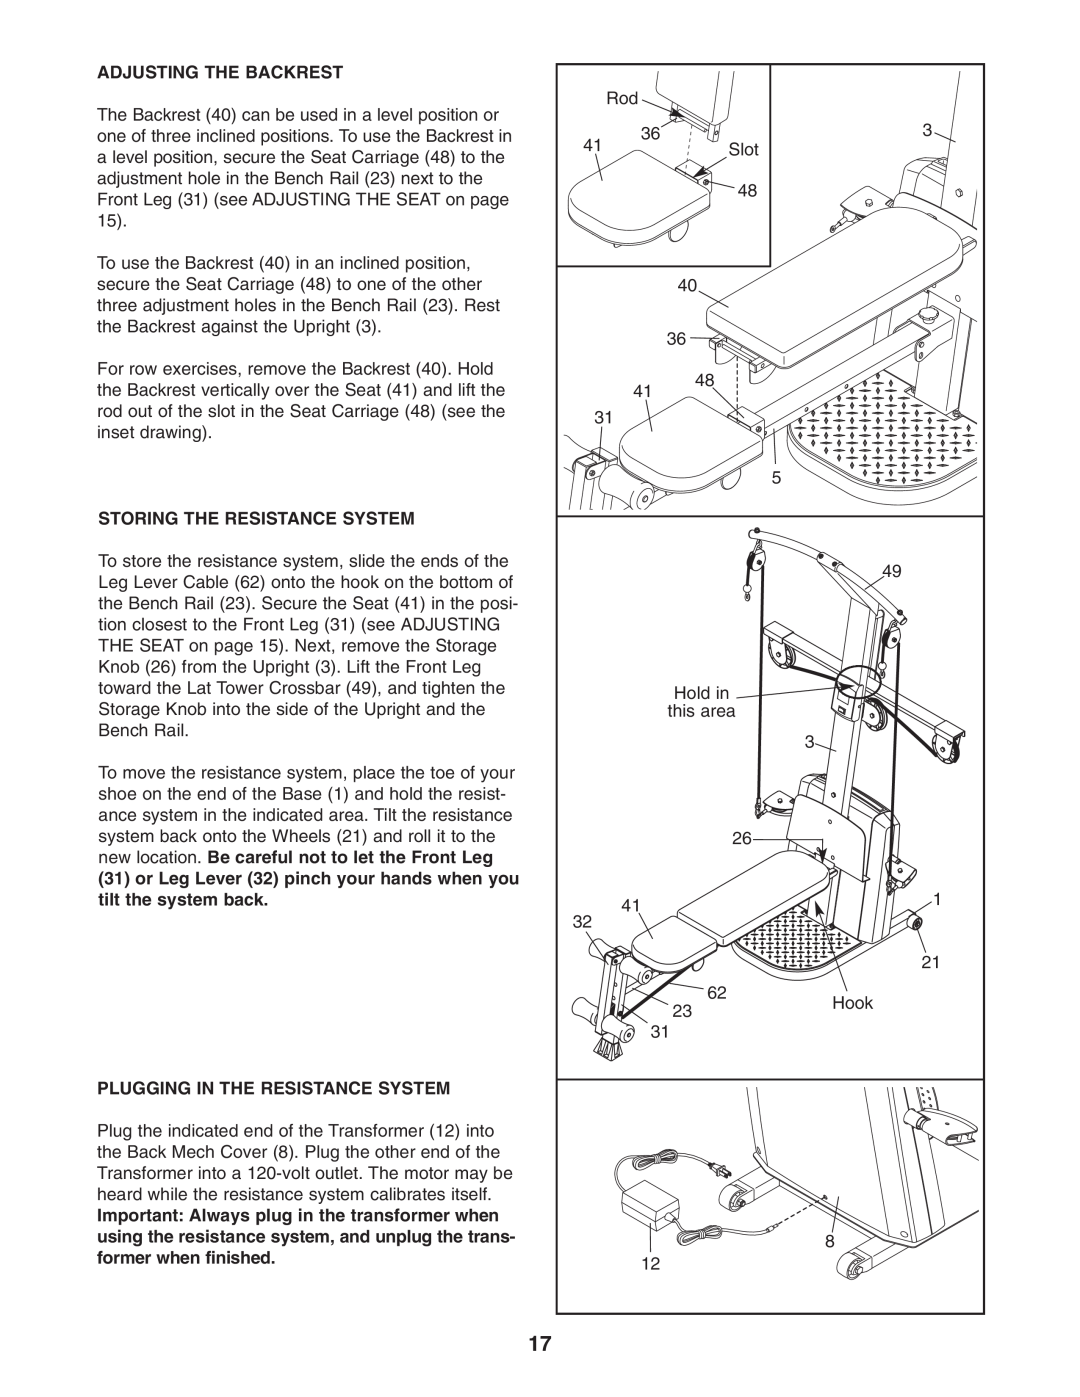 Weider WESY68632 user manual Adjusting The Backrest, Storing The Resistance System, Plugging In The Resistance System 